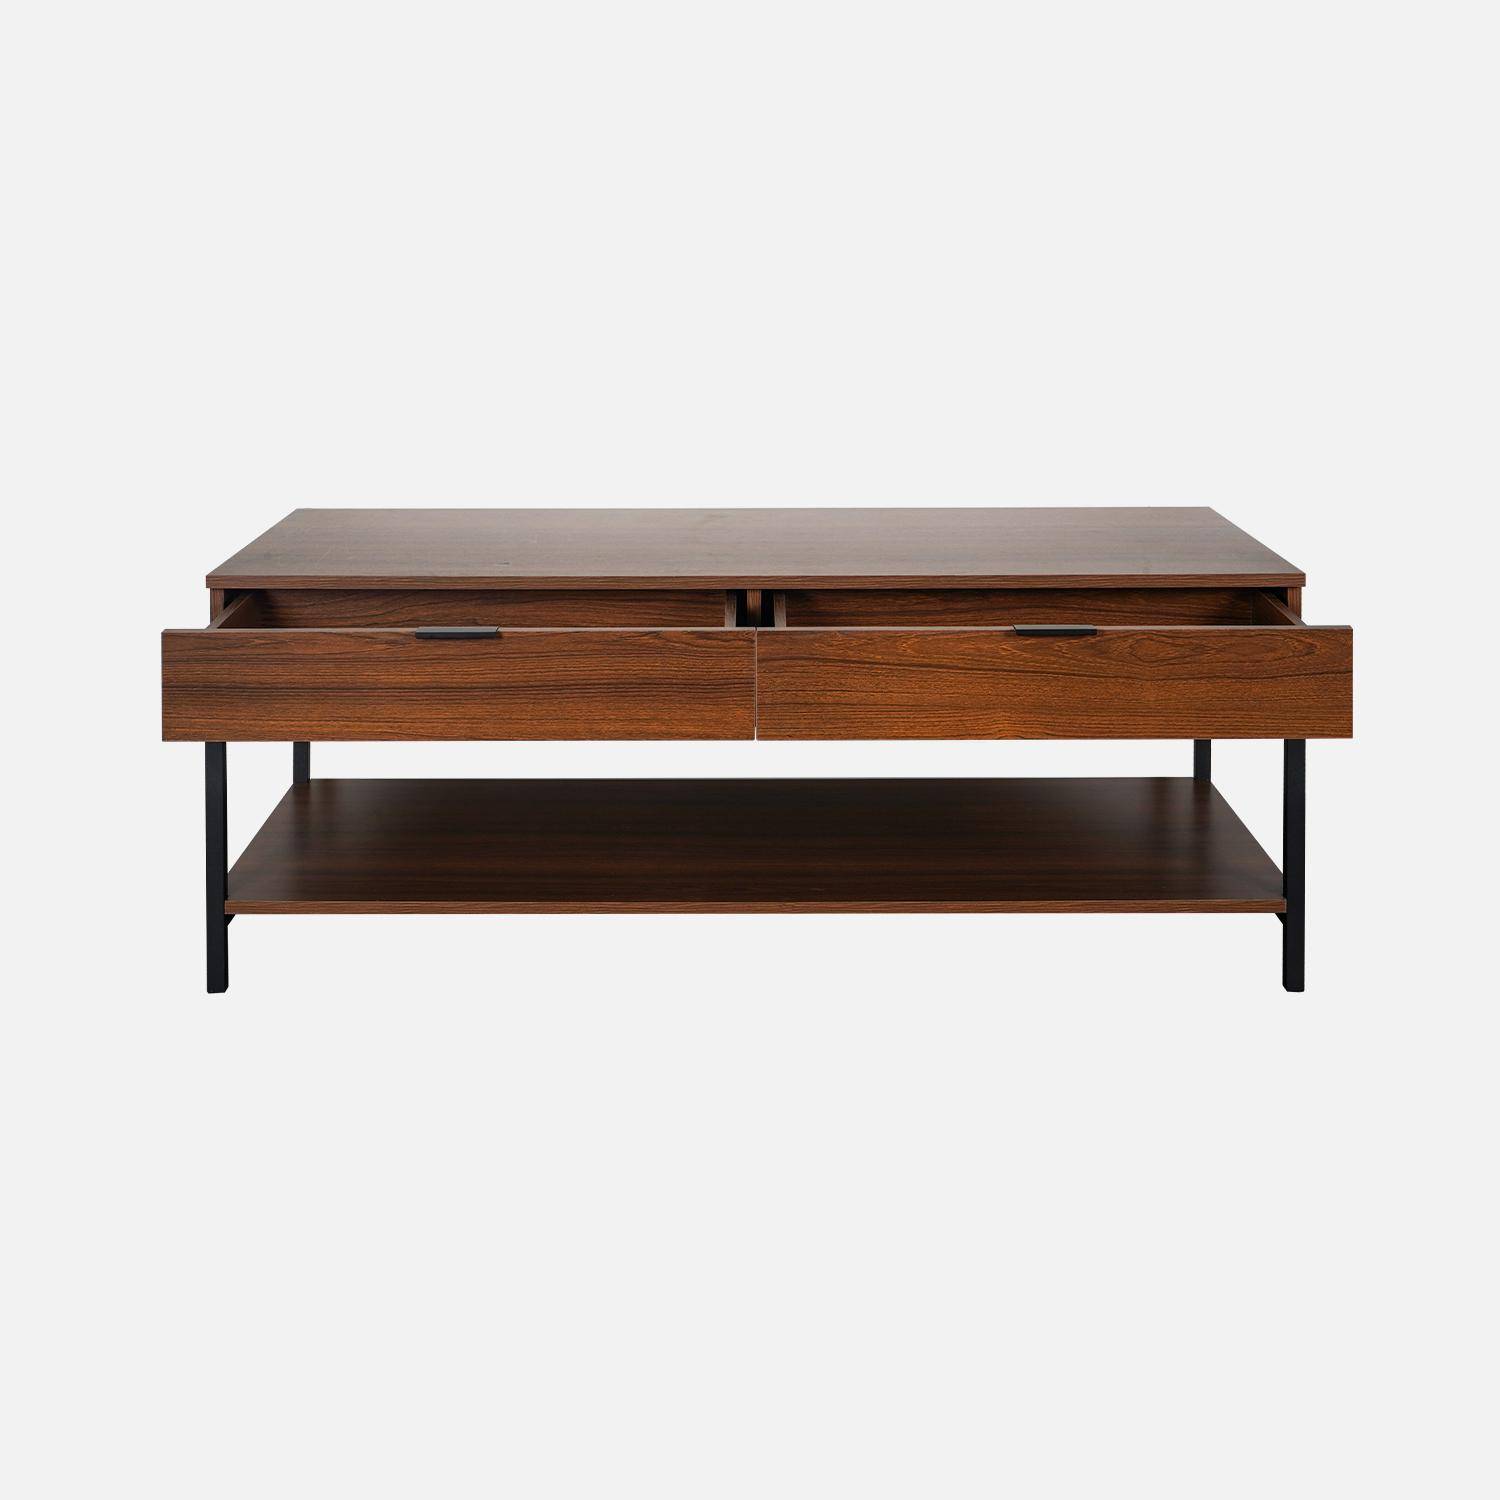 Walnut-coloured coffee table with black metal legs and handle - 2 drawers and 1 shelf Photo6